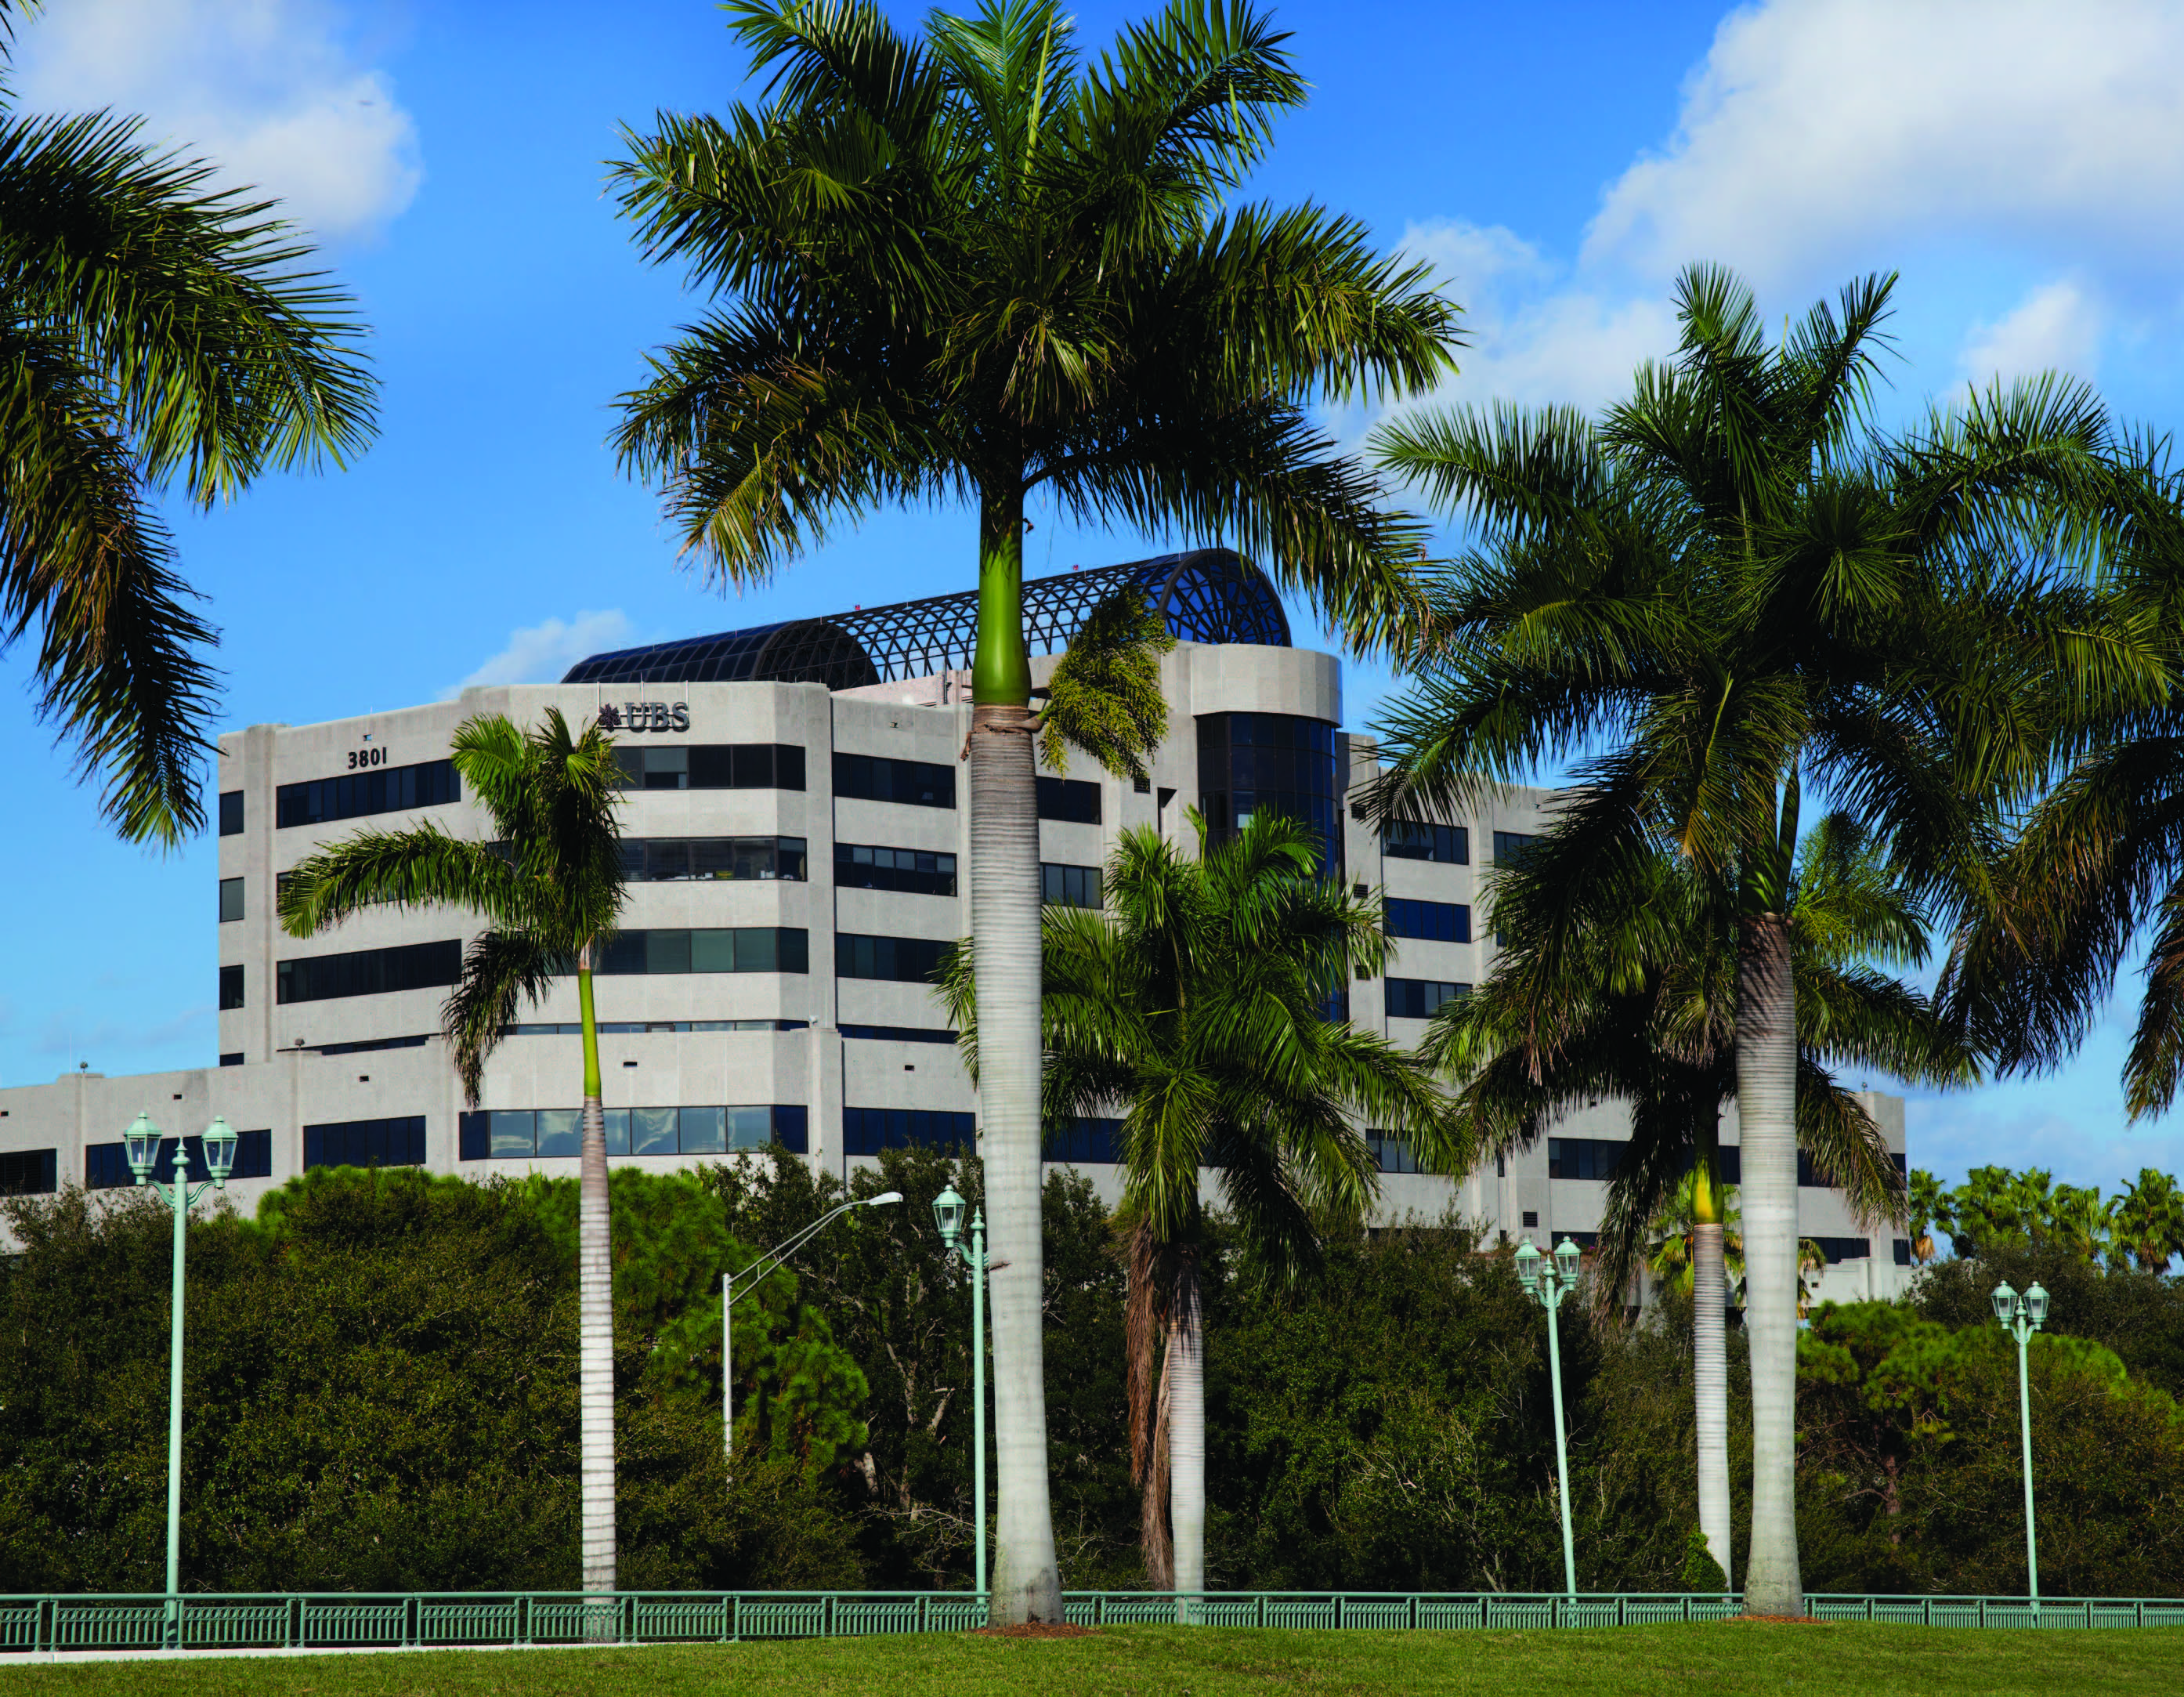 The office building at 3801 PGA Boulevard